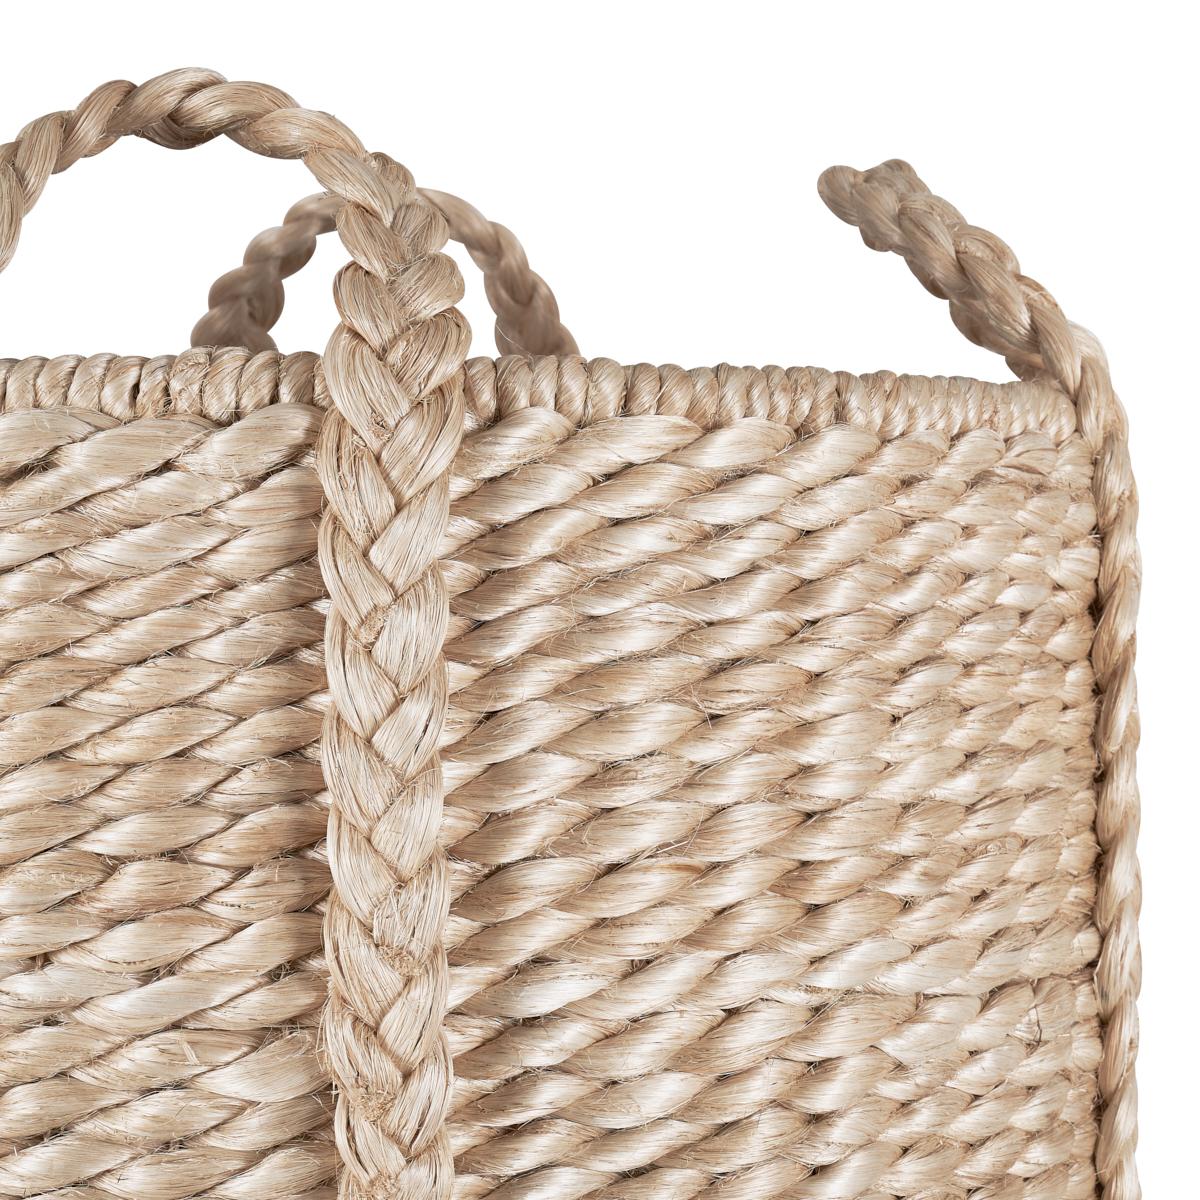 Strikingly textural, our Lubid Natural Abaca Basket beautifully combines form with sturdy durability. Handwoven in the Philippines out of abaca, a tree fiber that’s tough yet surprisingly soft to the touch, this basket’s chunky weave contrasts with